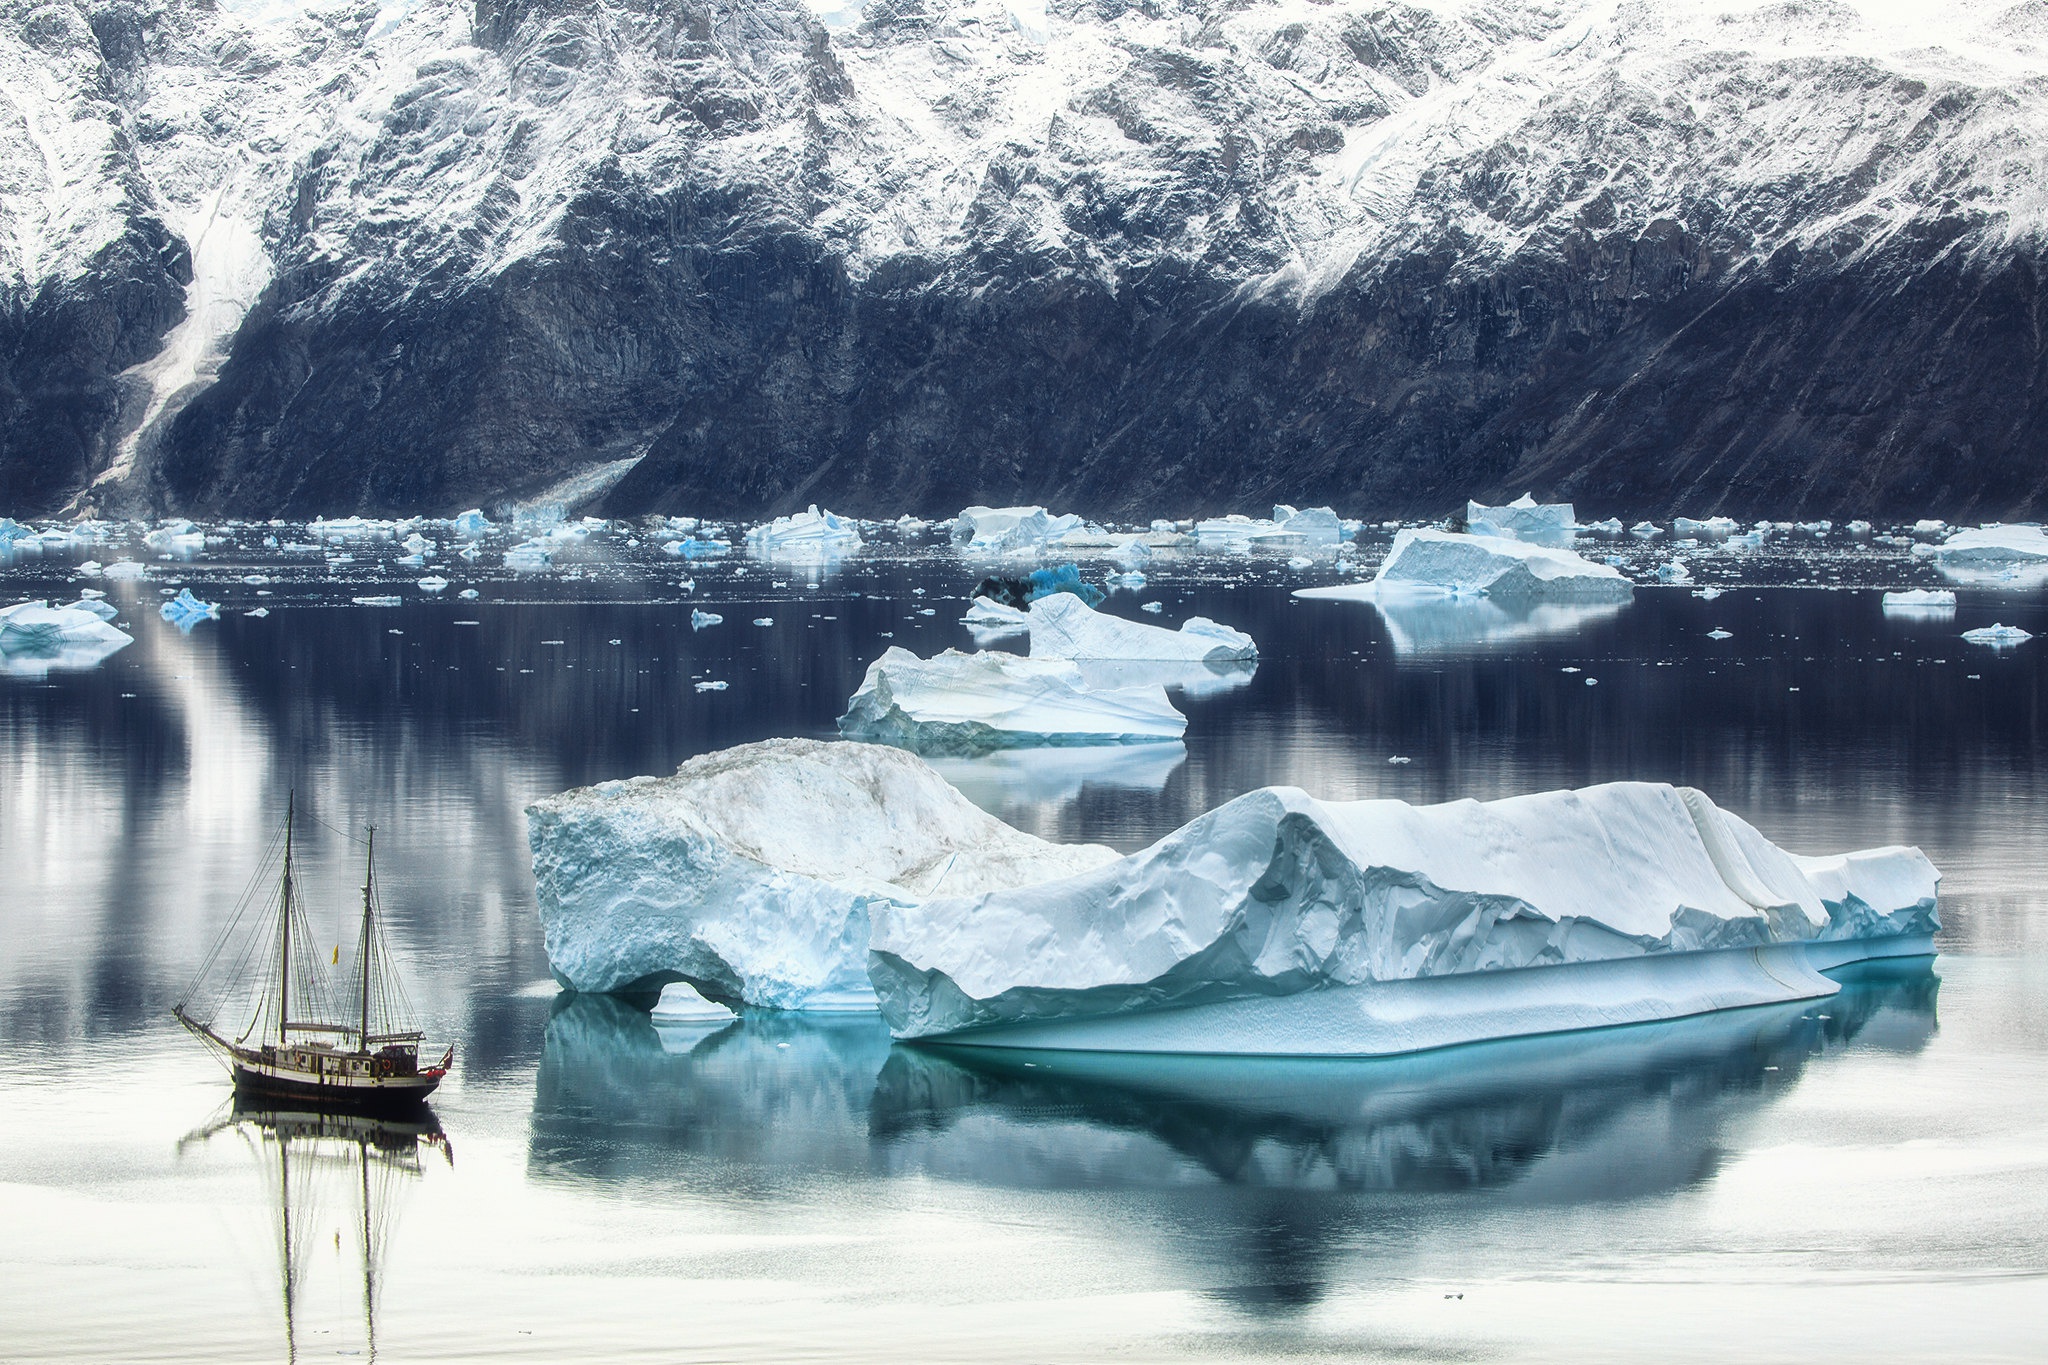 General 2048x1365 Greenland ice water nature